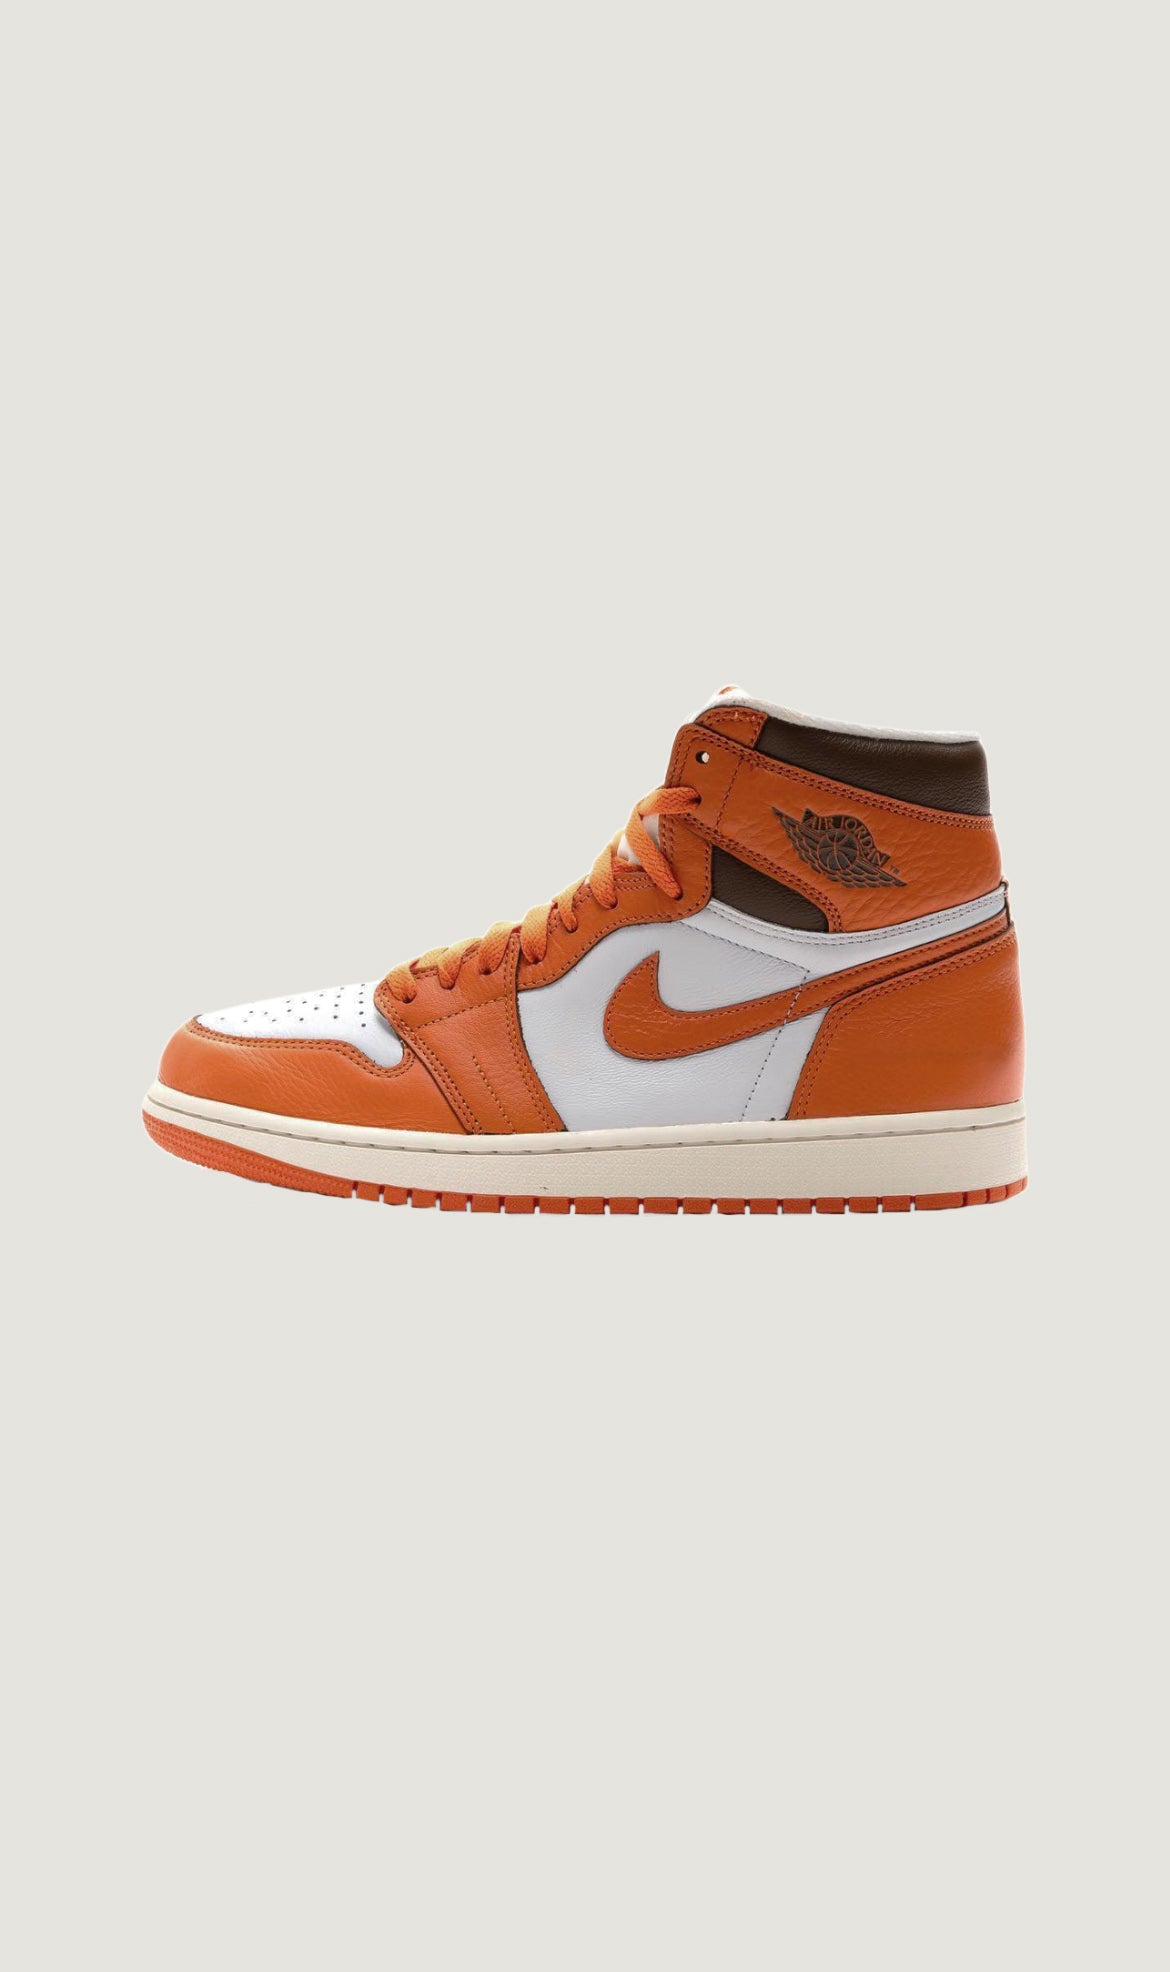 Load image into Gallery viewer, WMNS AIR JORDAN 1 HIGH OG - STARFISH
